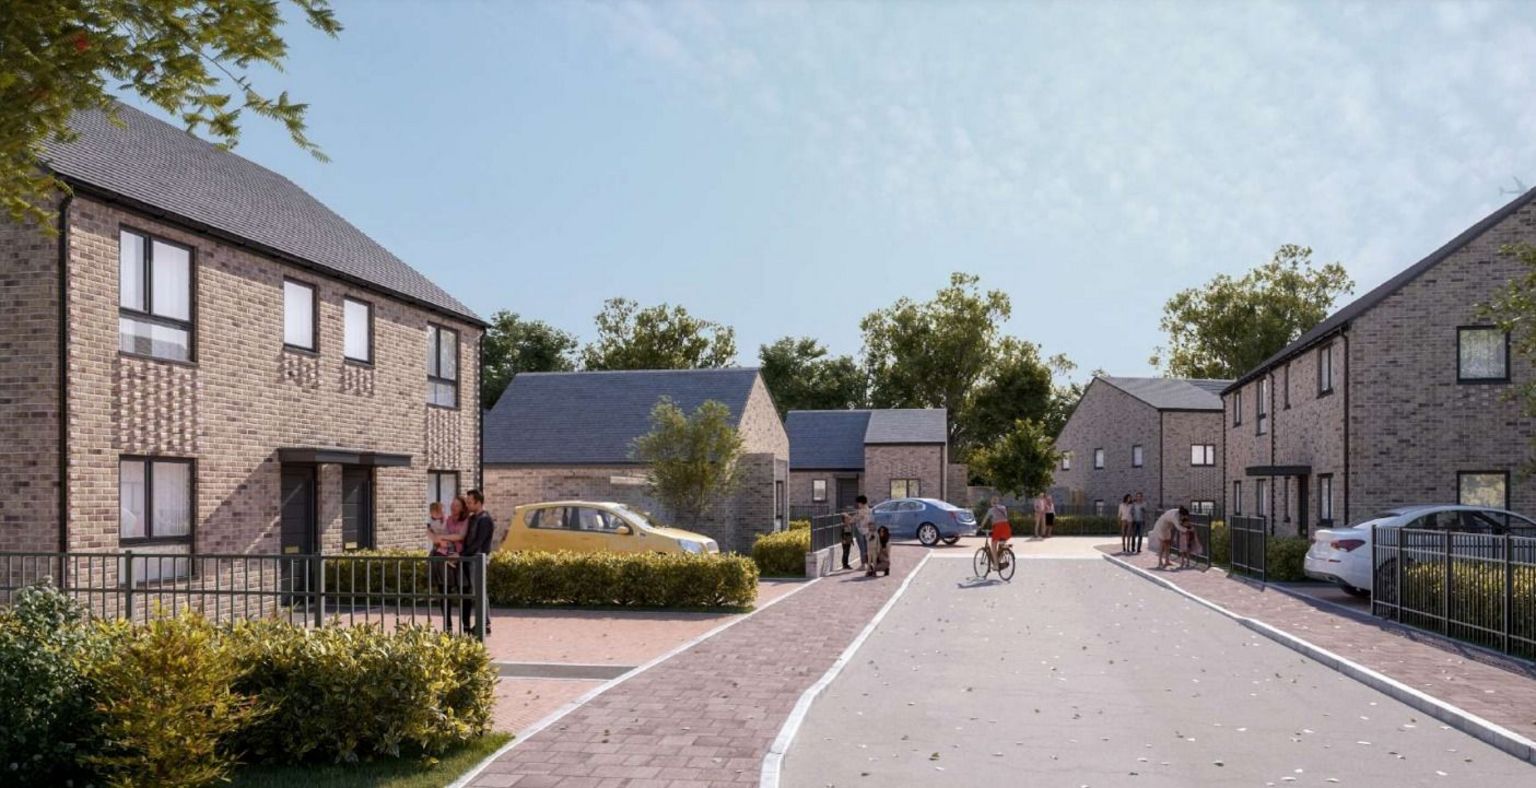 A digital image of how the new housing development in Old Fallings Crescent, Low Hill, could look